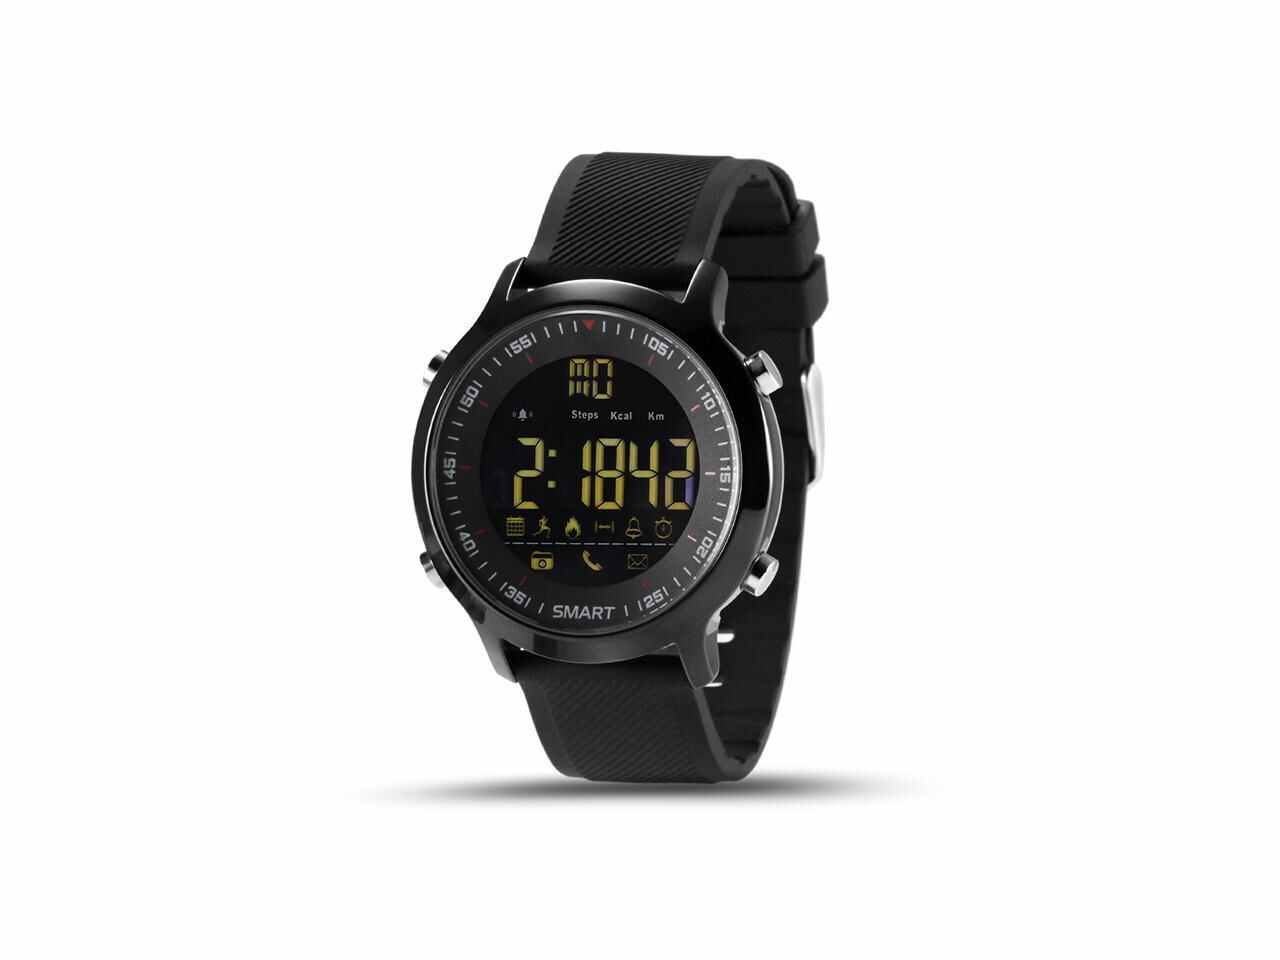 EX18 Smart Watch IP67 Waterproof 5ATM Pedometer Message Reminder Long Standby Time for Outdoor Sports